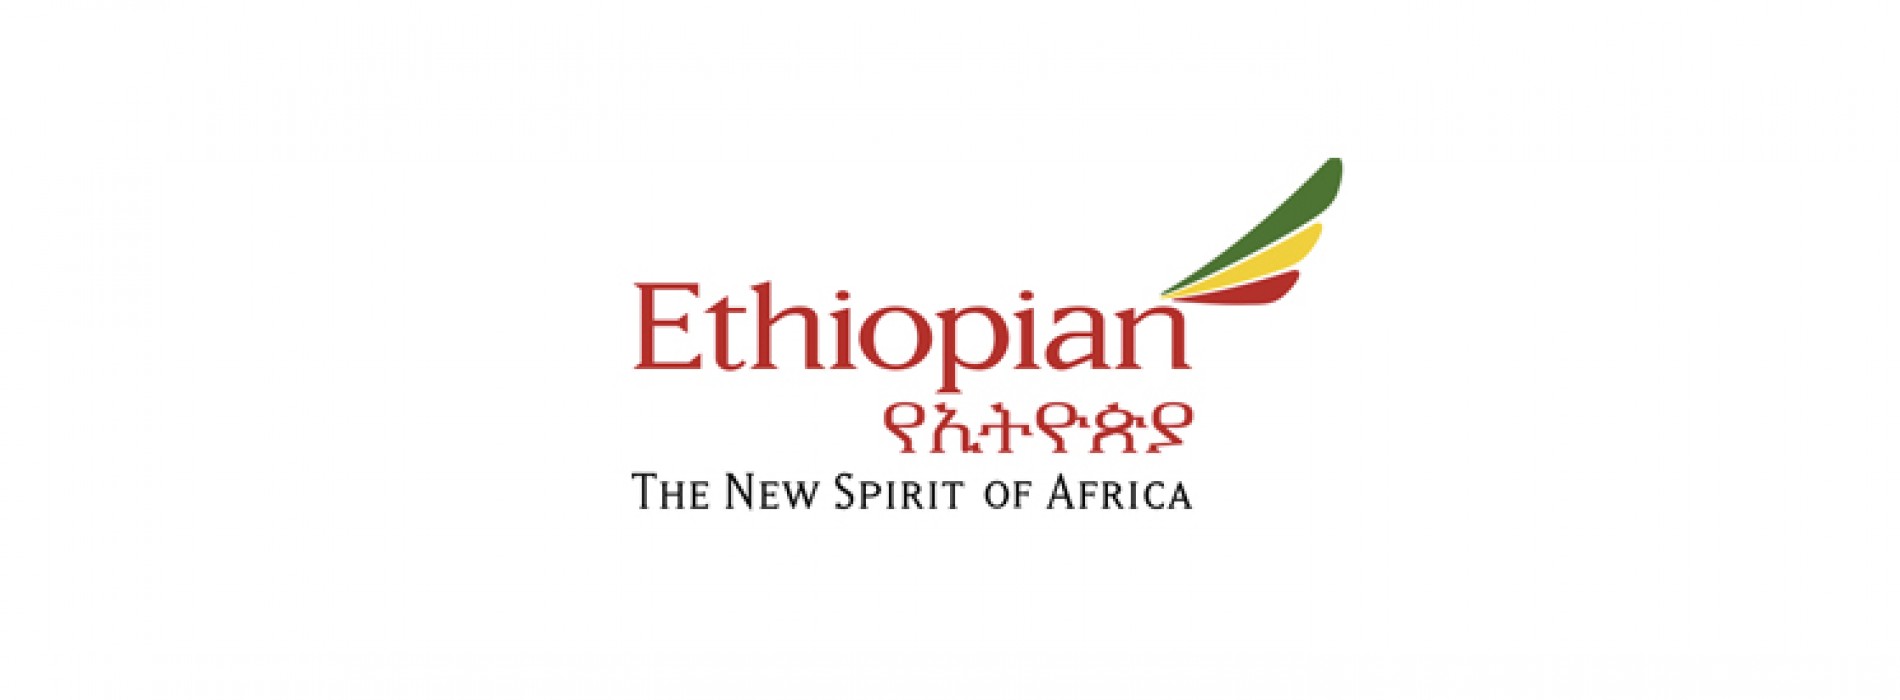 Ethiopian voted as Best Airline to Africa and Best Airline in Africa By Premier Traveler Magazine Customer Survey